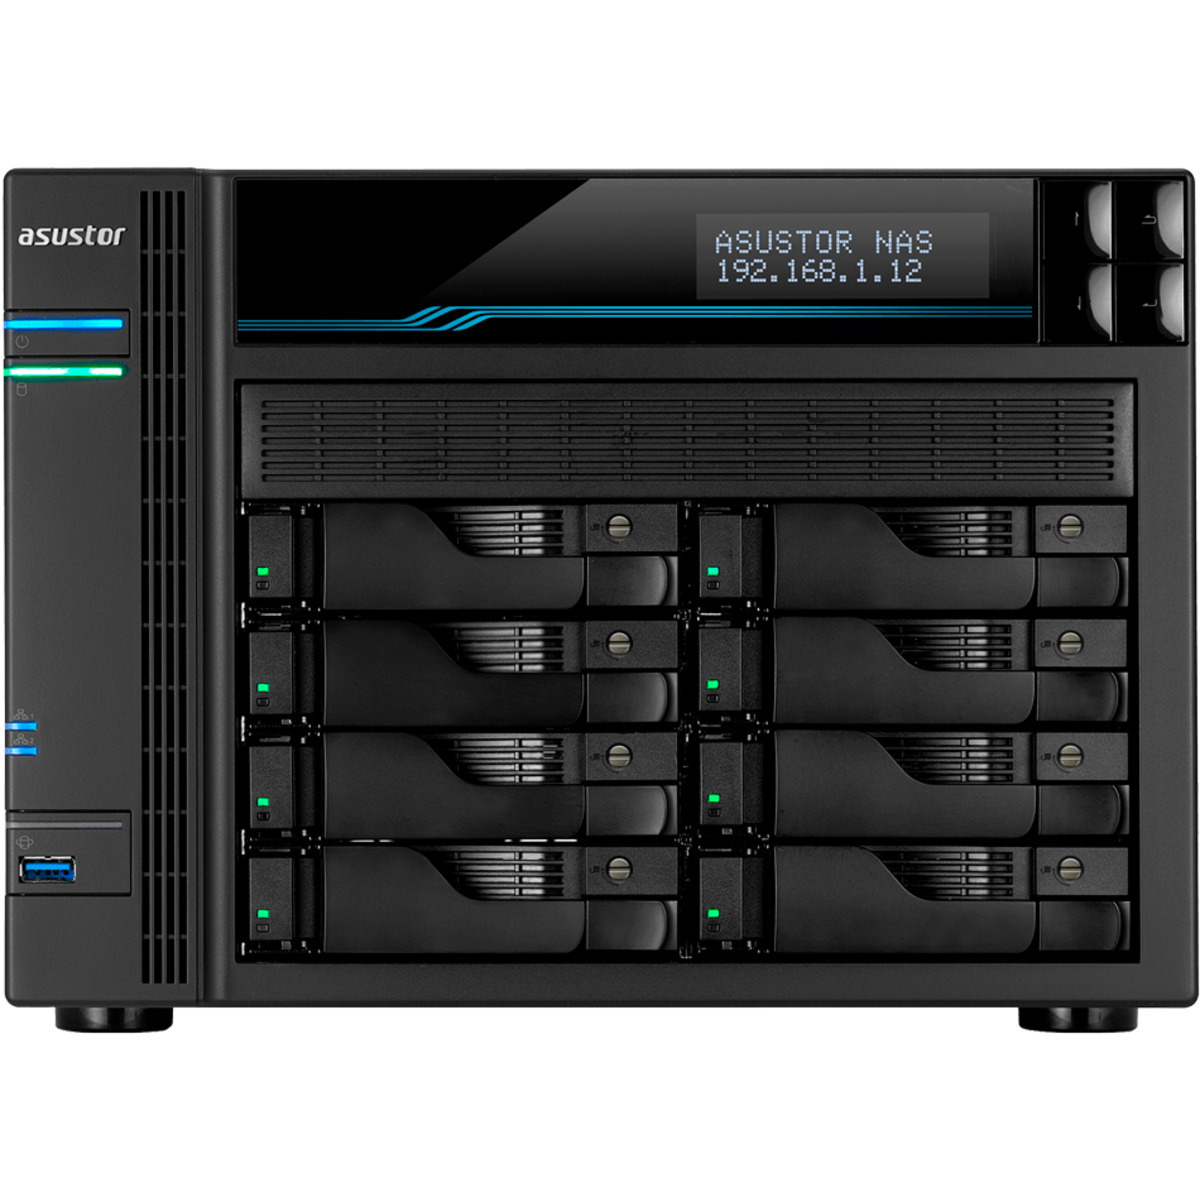 ASUSTOR AS6508T Lockerstor 8 80tb 8-Bay Desktop Multimedia / Power User / Business NAS - Network Attached Storage Device 8x10tb Seagate IronWolf Pro ST10000NT001 3.5 7200rpm SATA 6Gb/s HDD NAS Class Drives Installed - Burn-In Tested - ON SALE - FREE RAM UPGRADE AS6508T Lockerstor 8